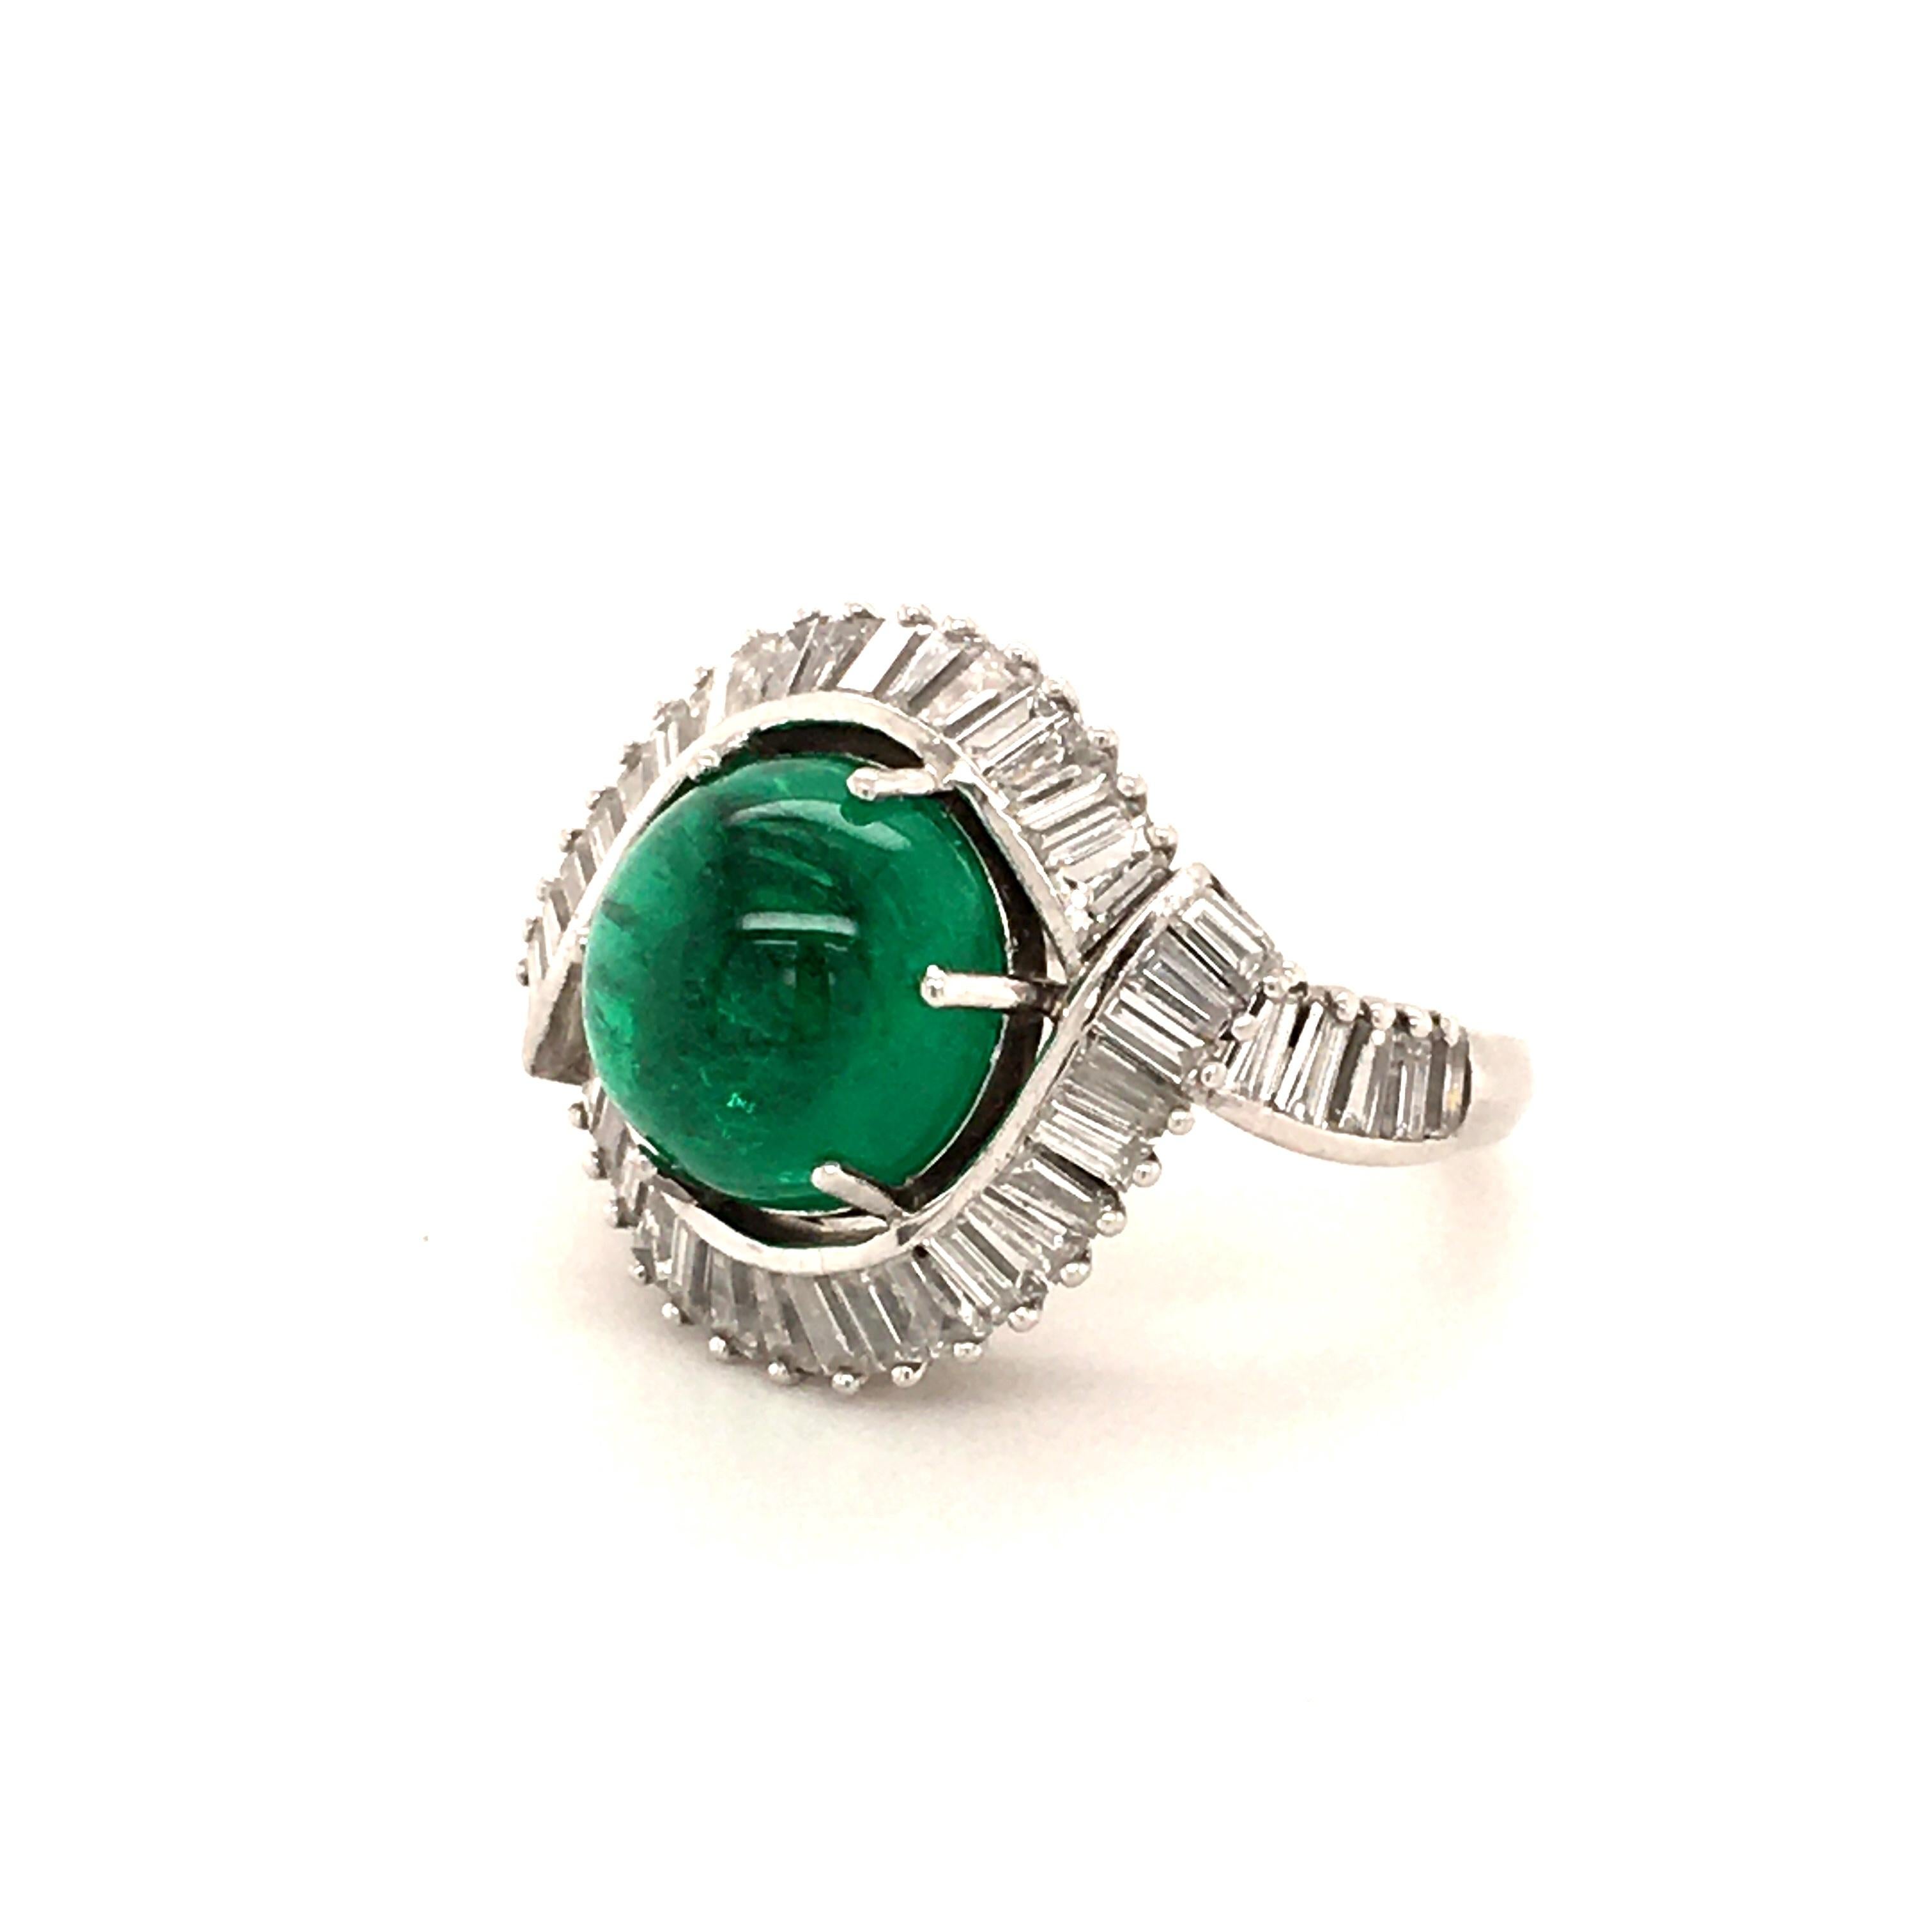 Contemporary 5.69 Carat Colombian Emerald and Diamond Ring in Platinum 950 For Sale